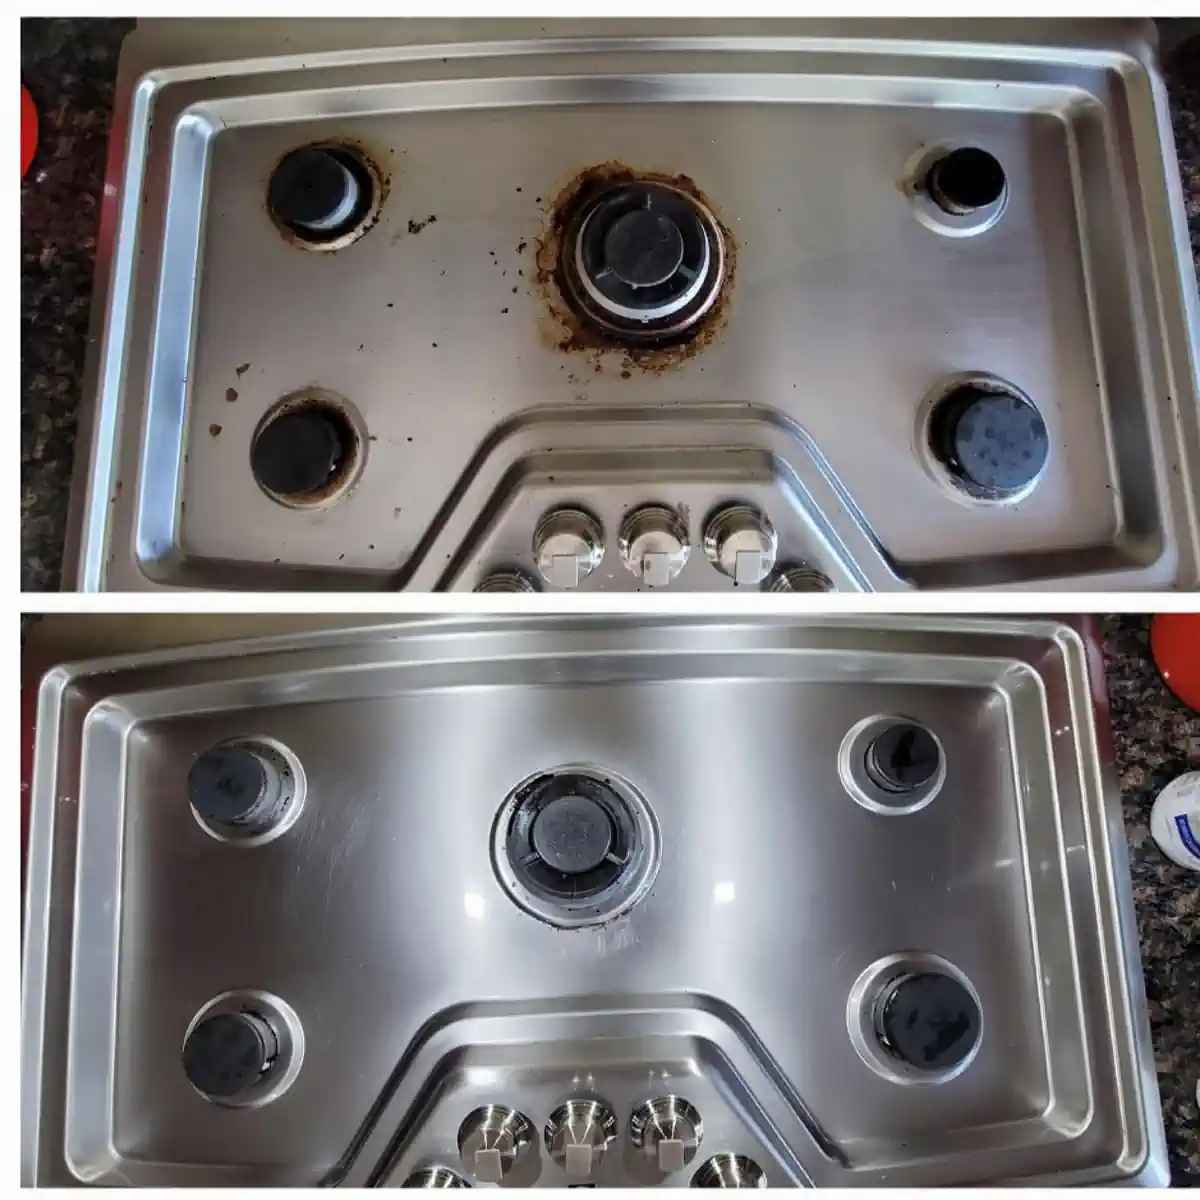 Clean stainless steel stovetop - Before and after